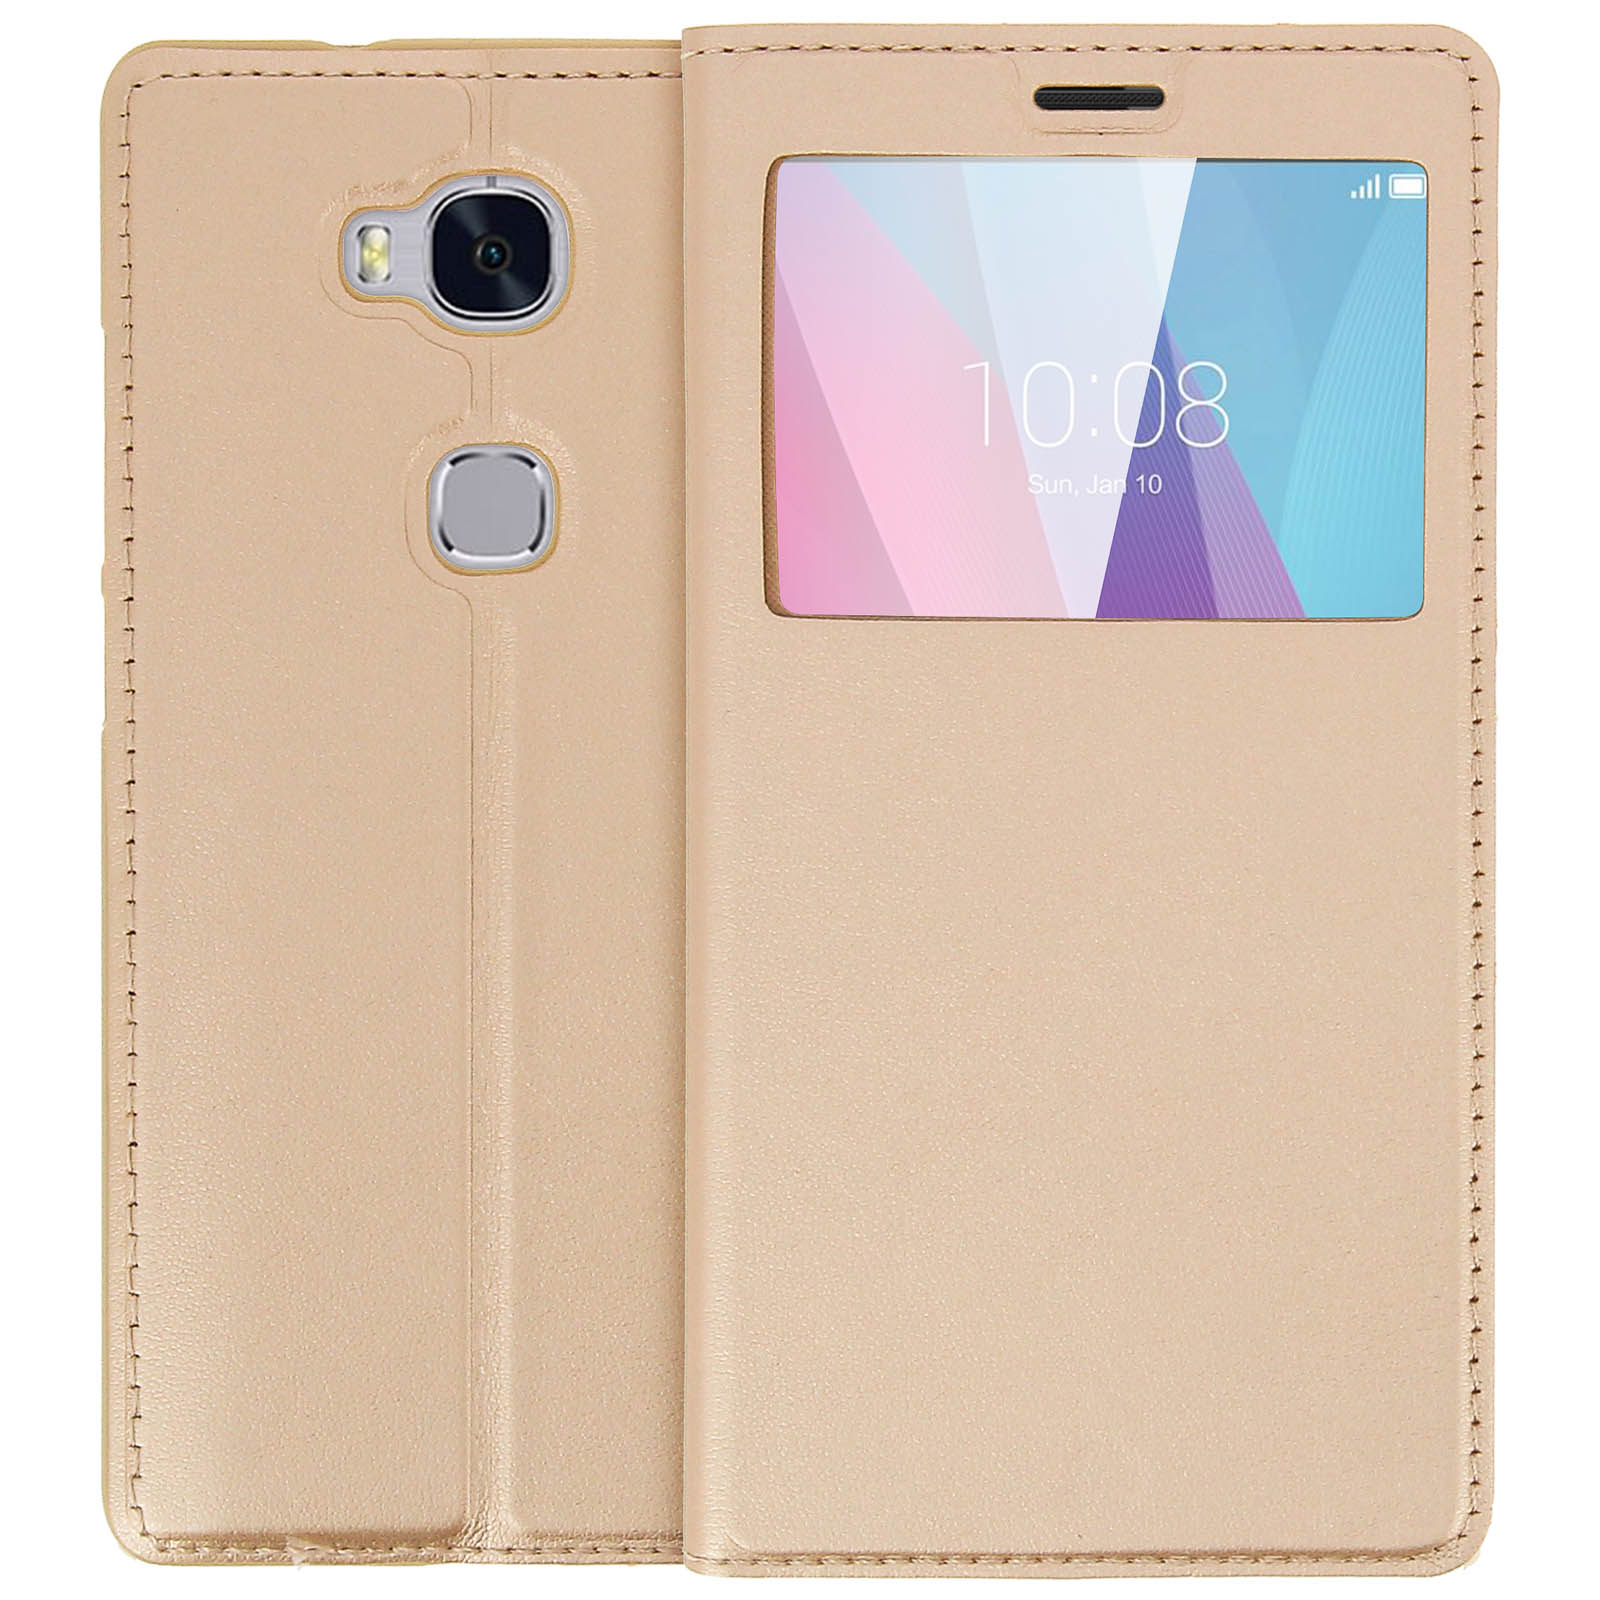 Series, Gold View Honor, Bookcover, Cover Honor 5X, CLAPPIO